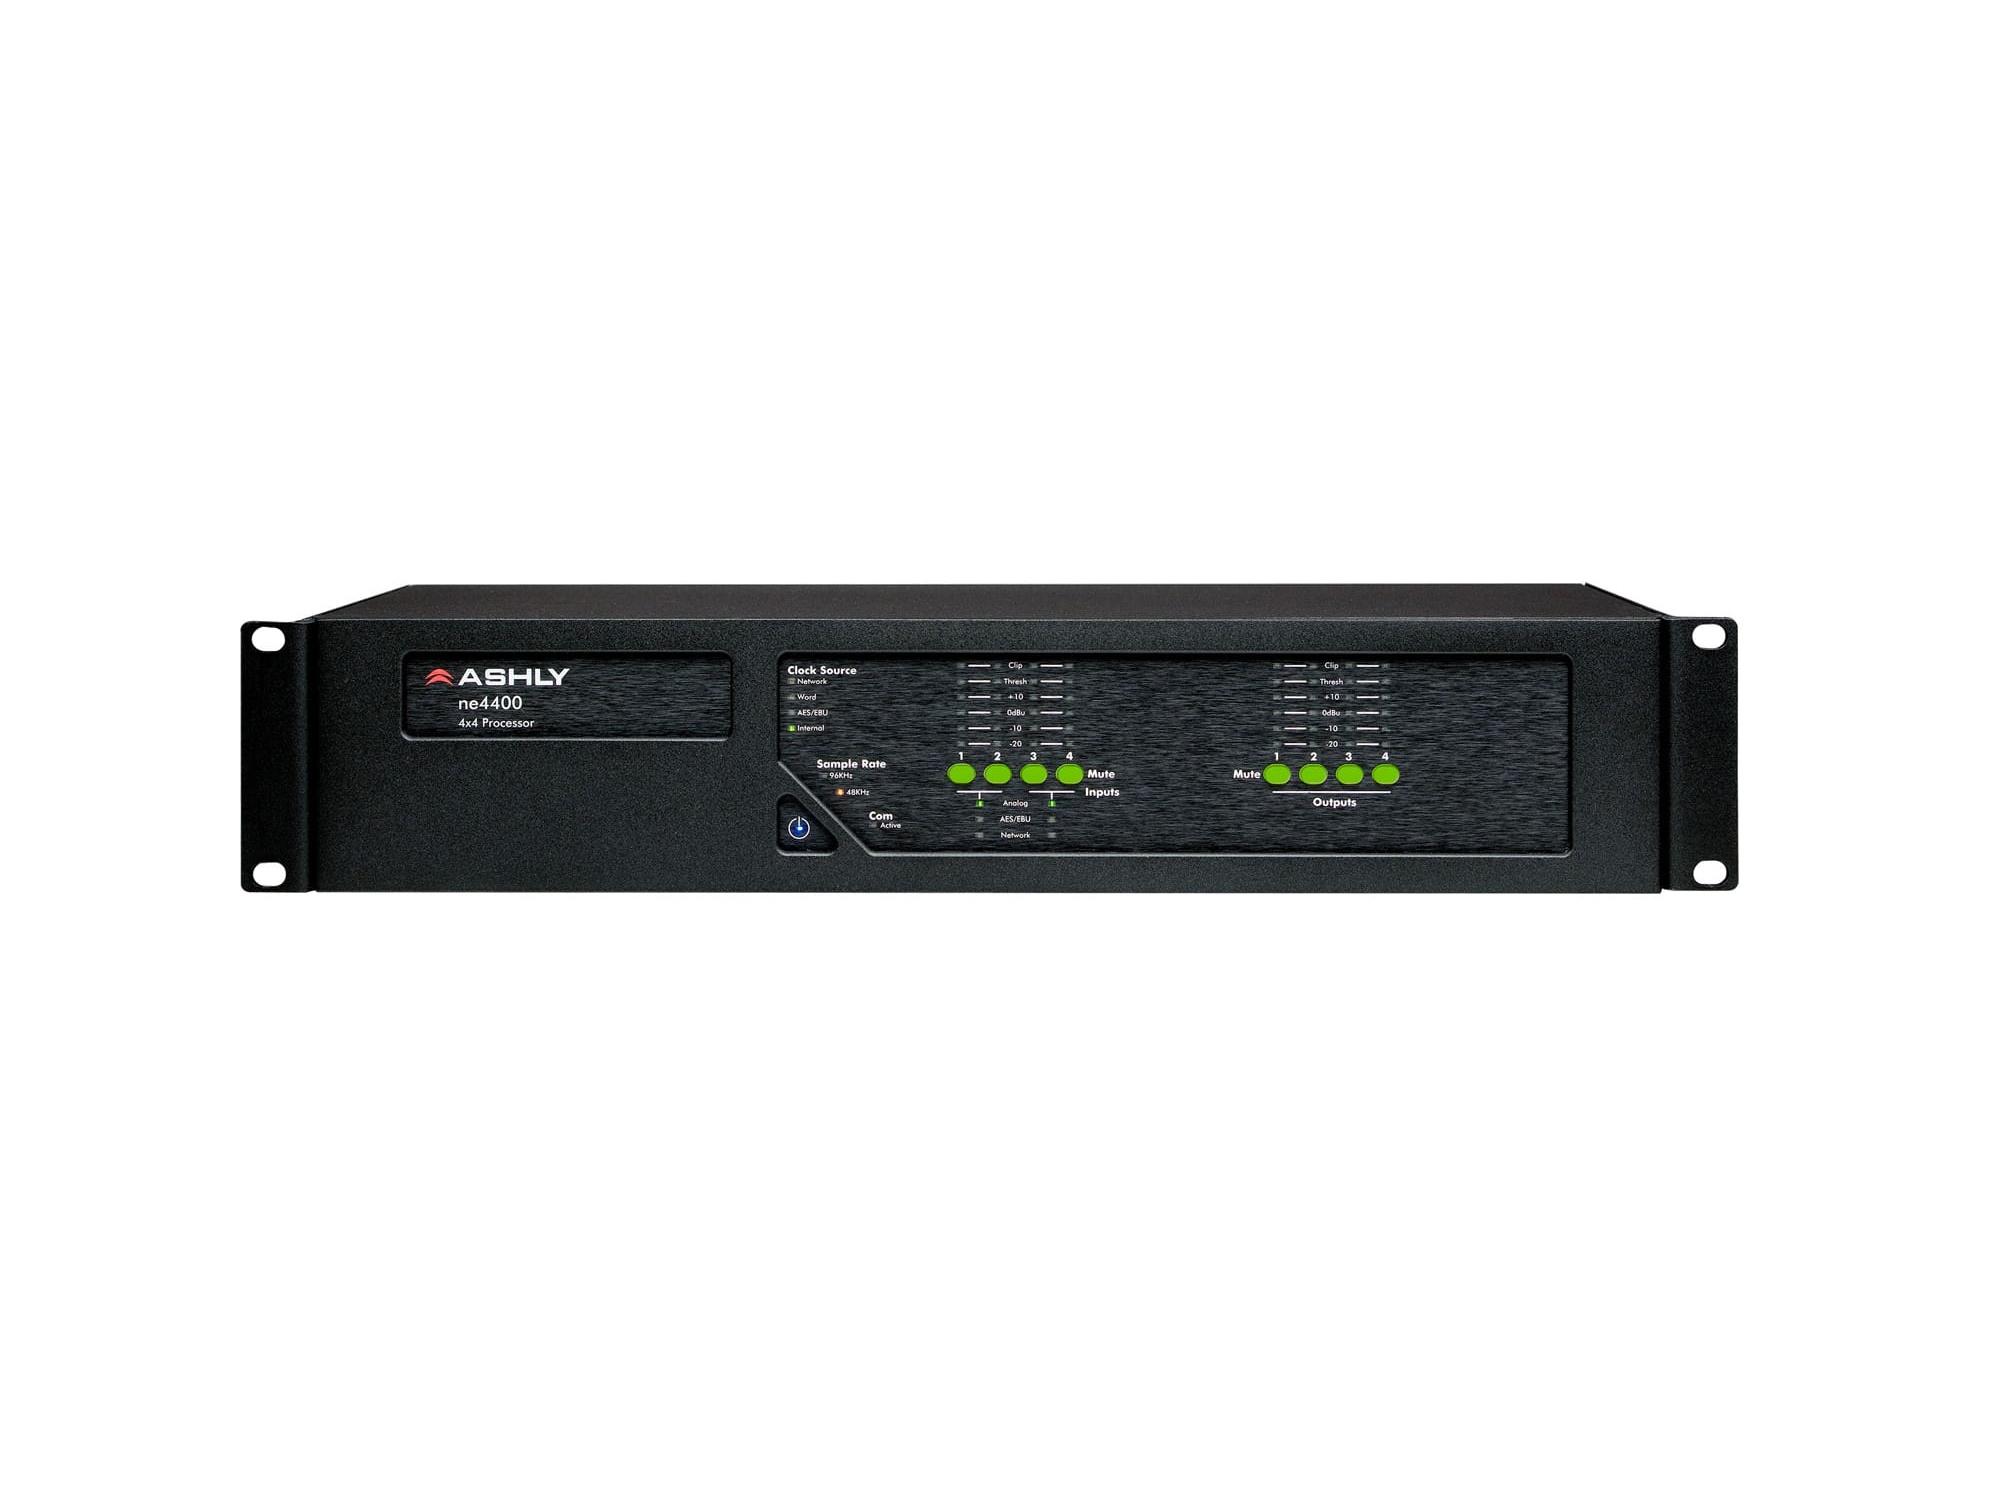 Ashly ne4400d Protea DSP Audio System Processor 4x4 I/O with 4-Channel AES3 Inputs